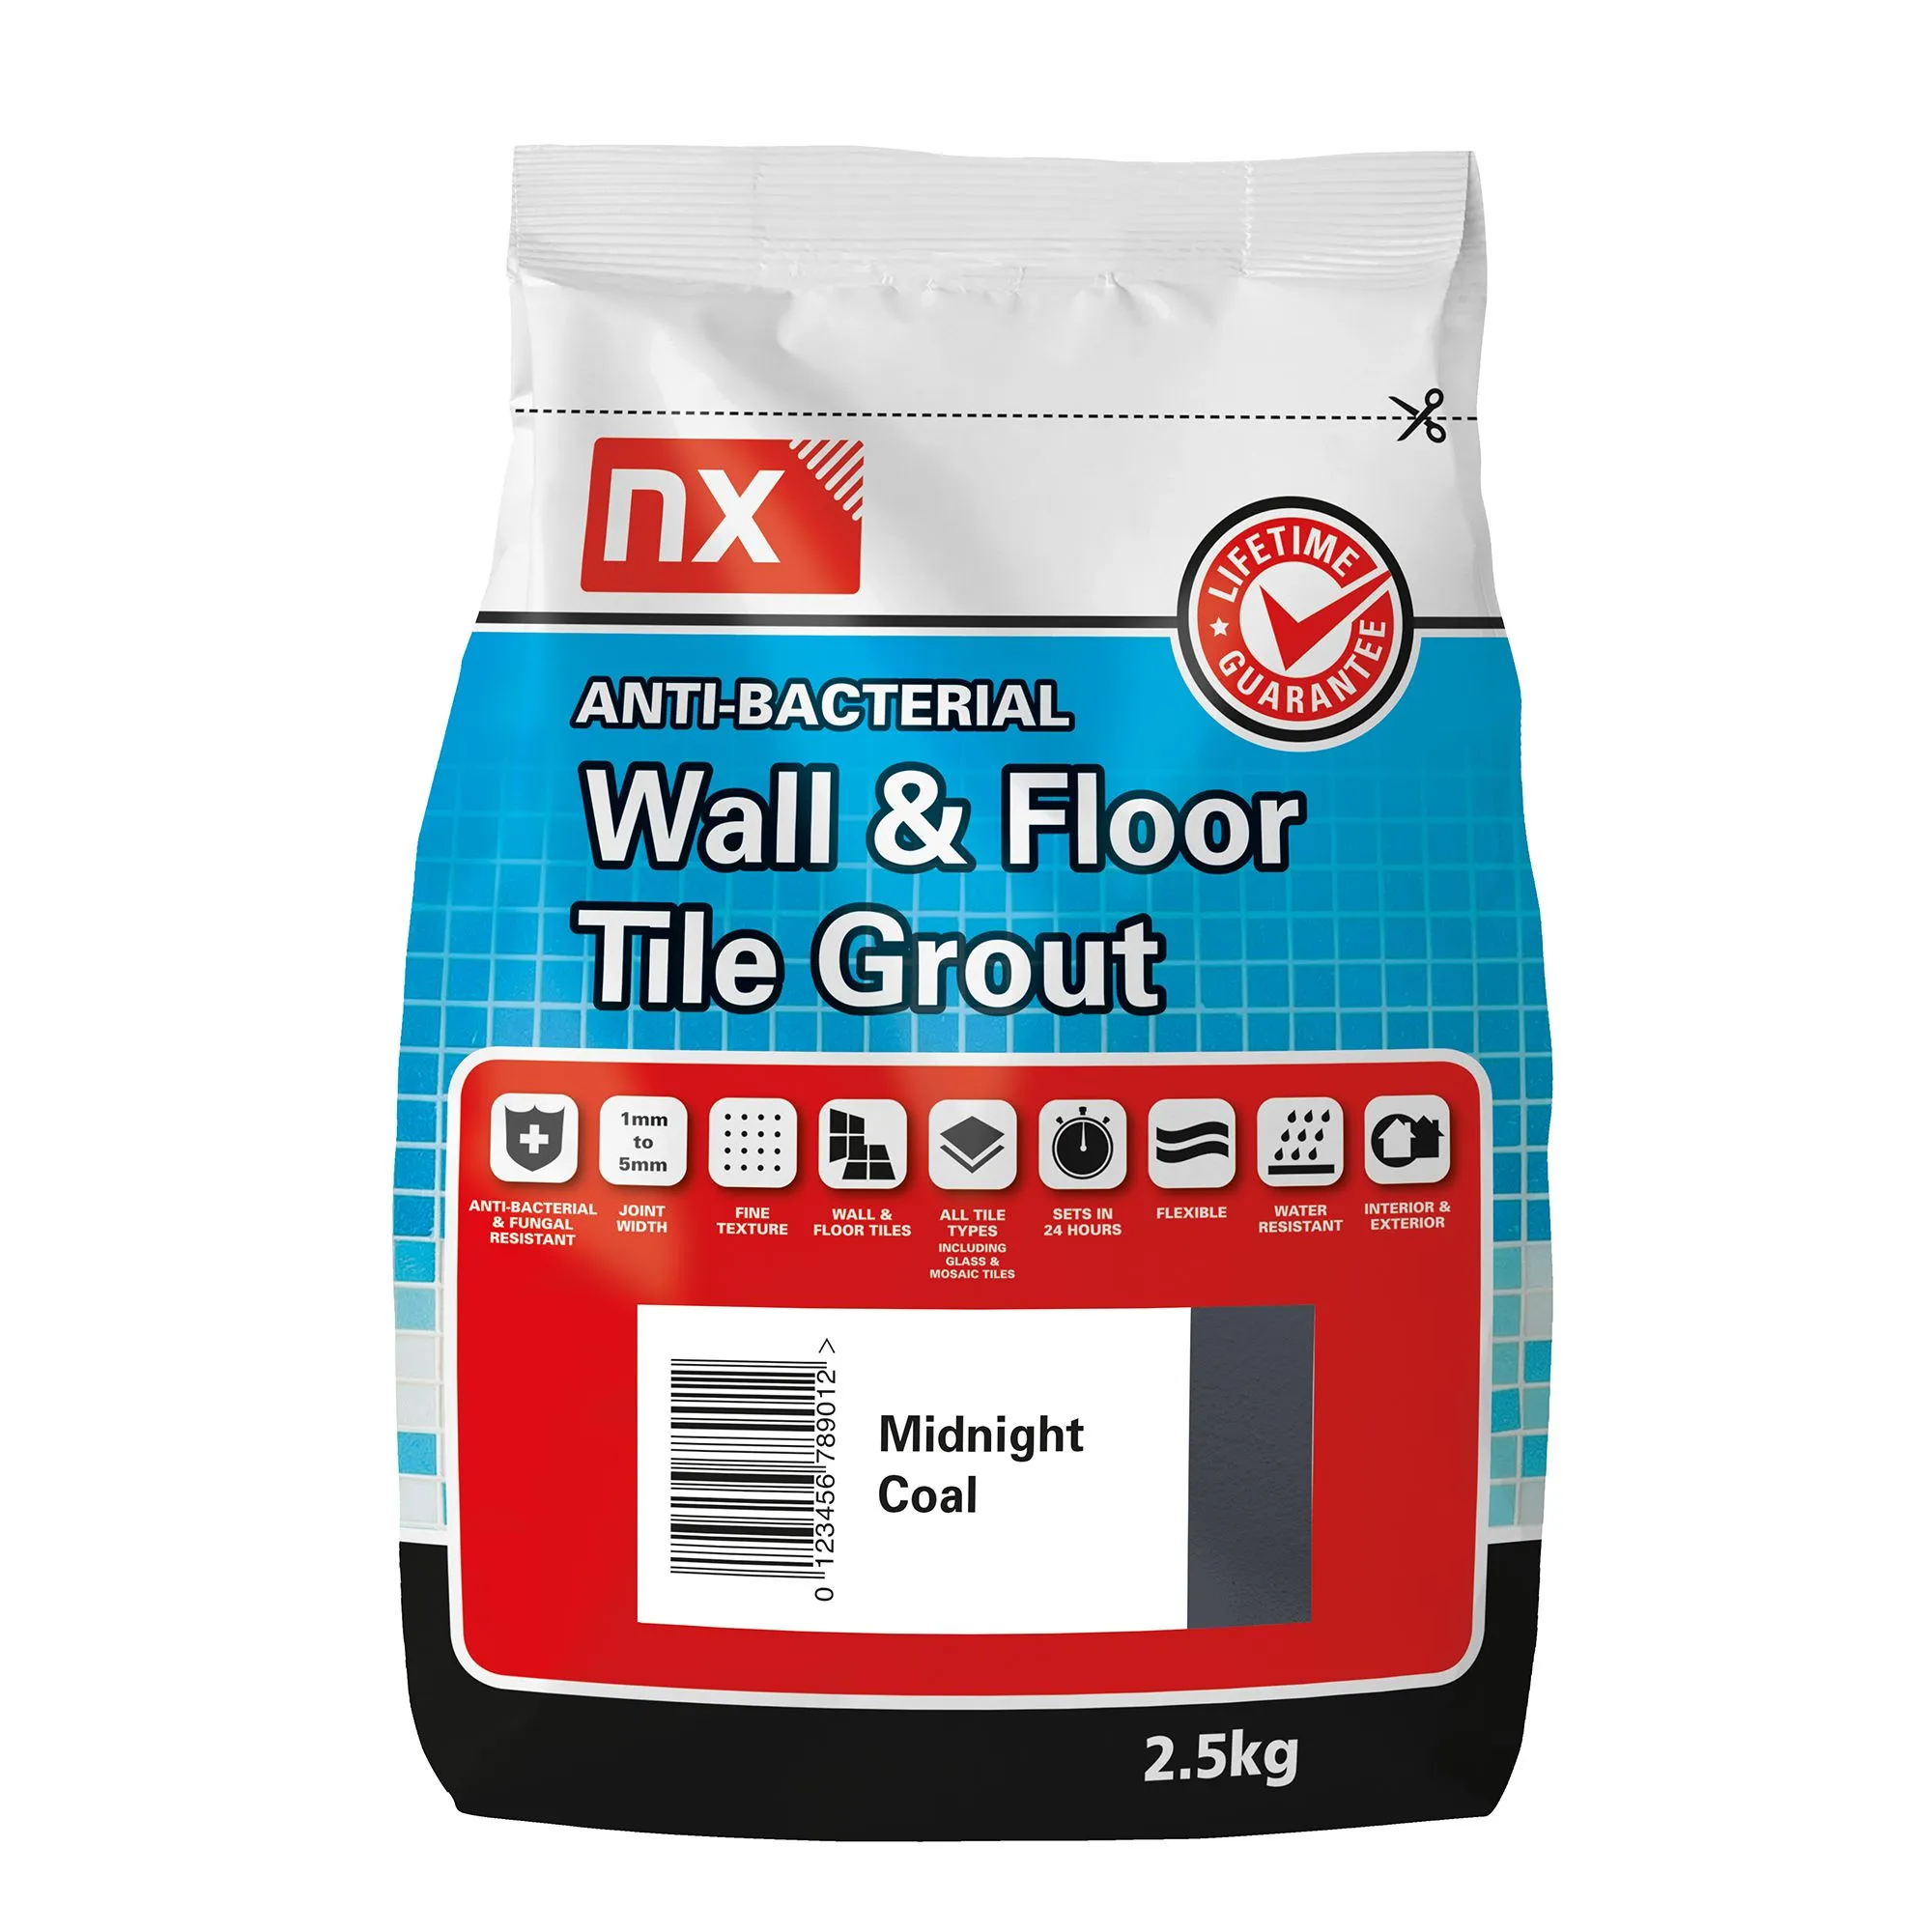 NX Anti-bacterial Fine textured Midnight coal Tile Grout, 2.5kg